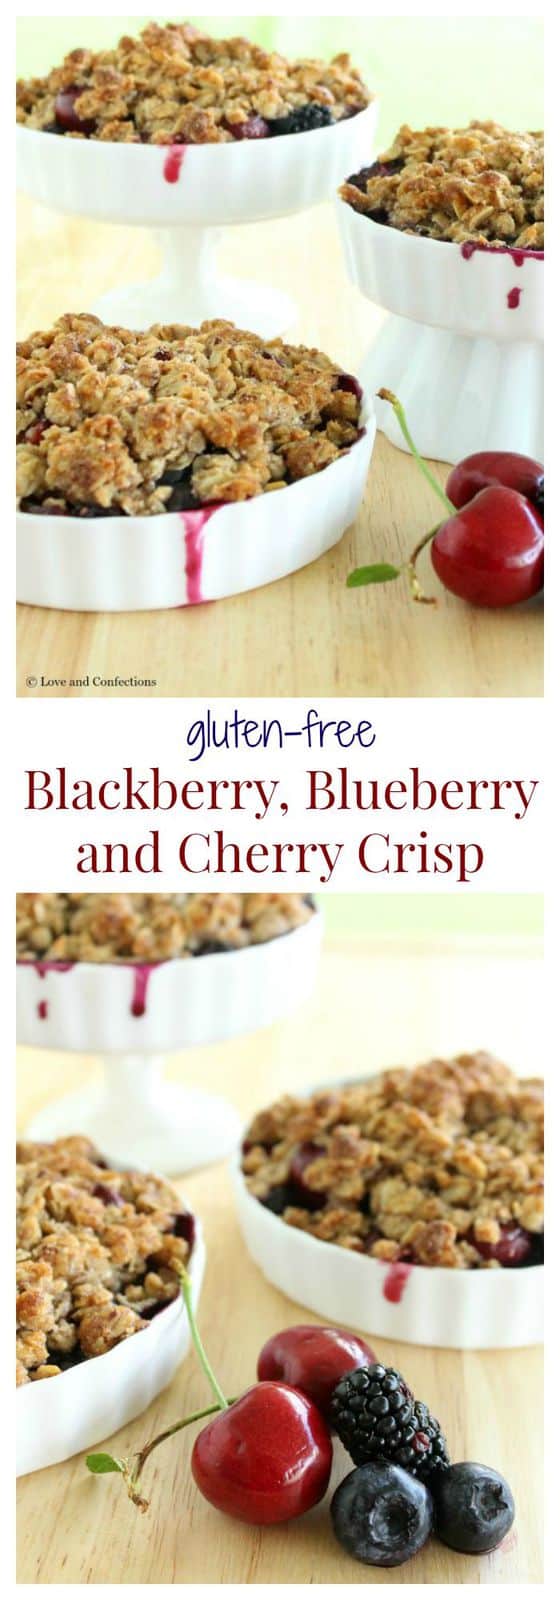 Gluten Free Blackberry, Blueberry and Cherry Crisp - Farmer’s market fresh fruits combine with a crunchy almond and oat crumb topping to make an easy Summer dessert | loveandconfections.com for cupcakesandkalechips.com